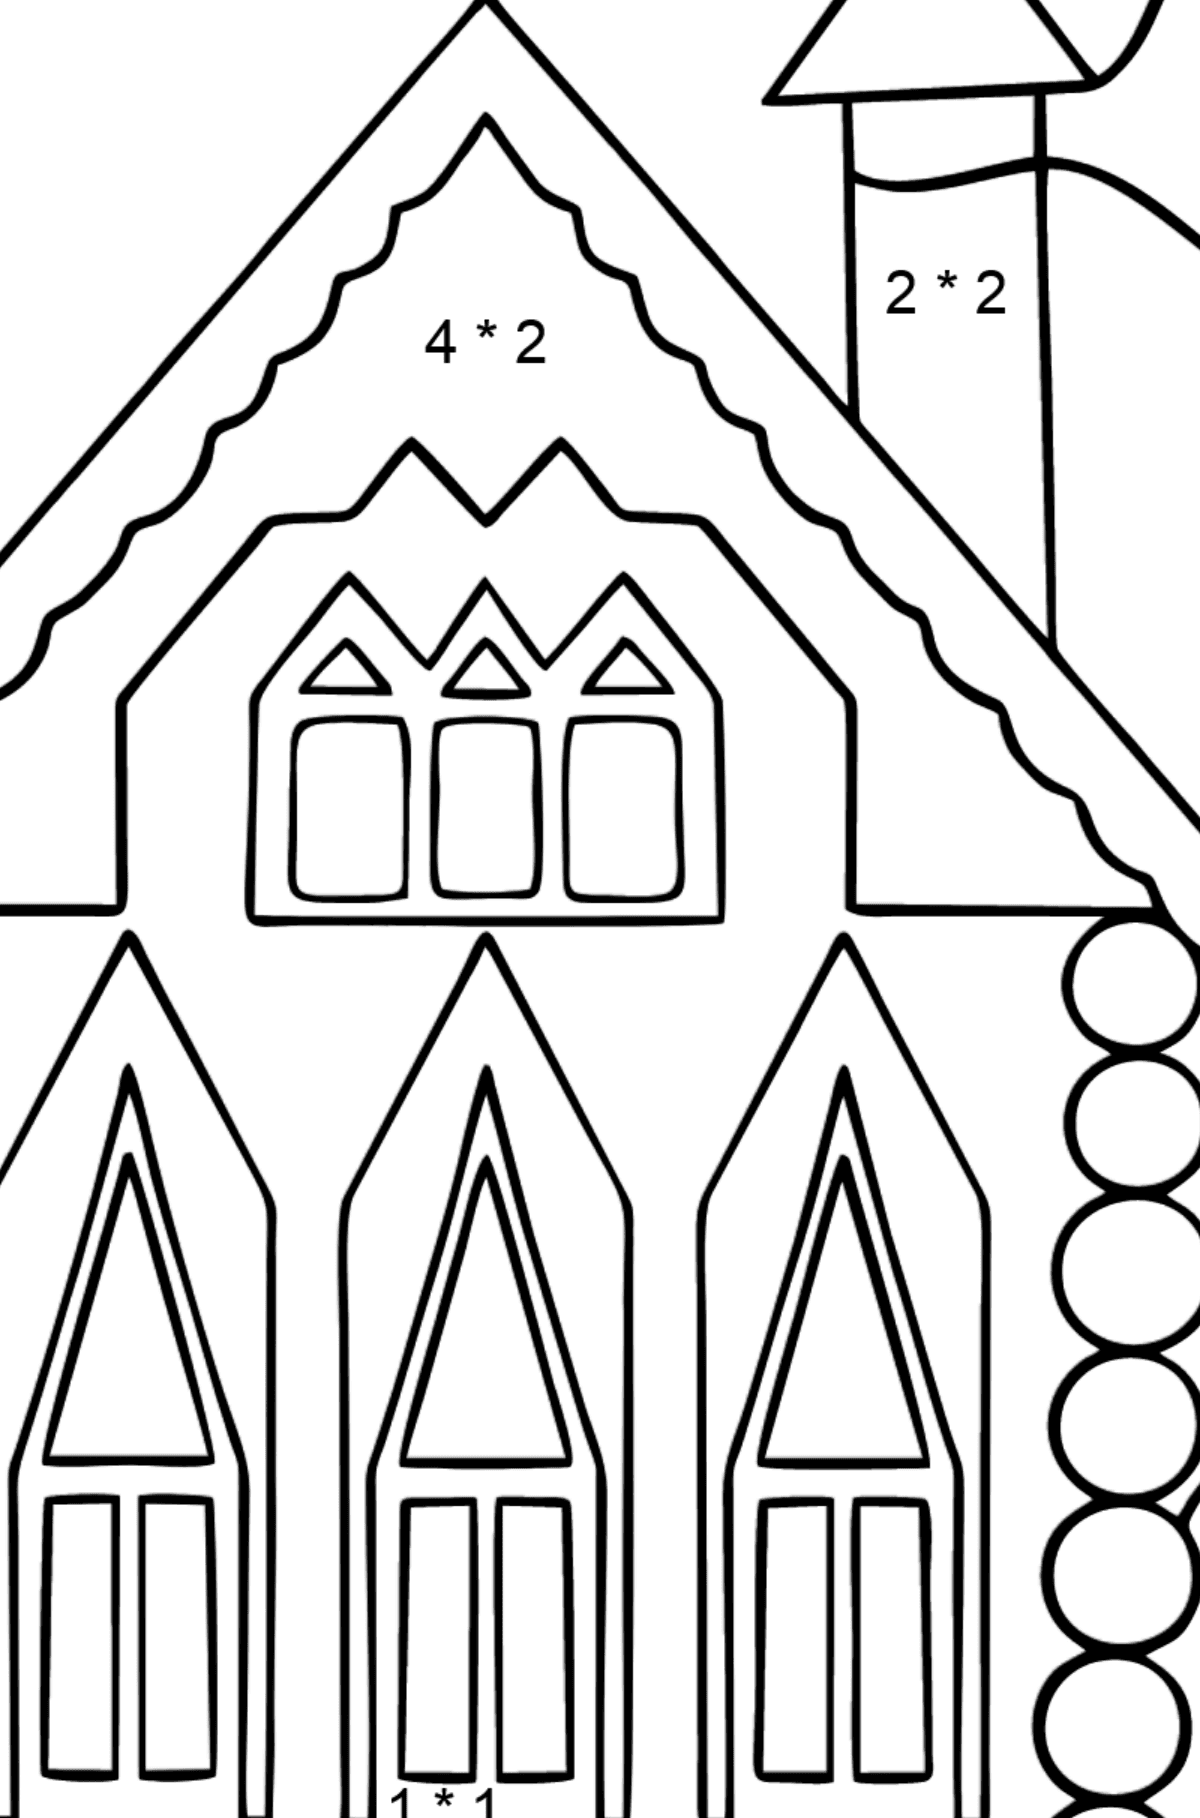 Simple Coloring Page - A Rainbow House - Math Coloring - Multiplication for Kids